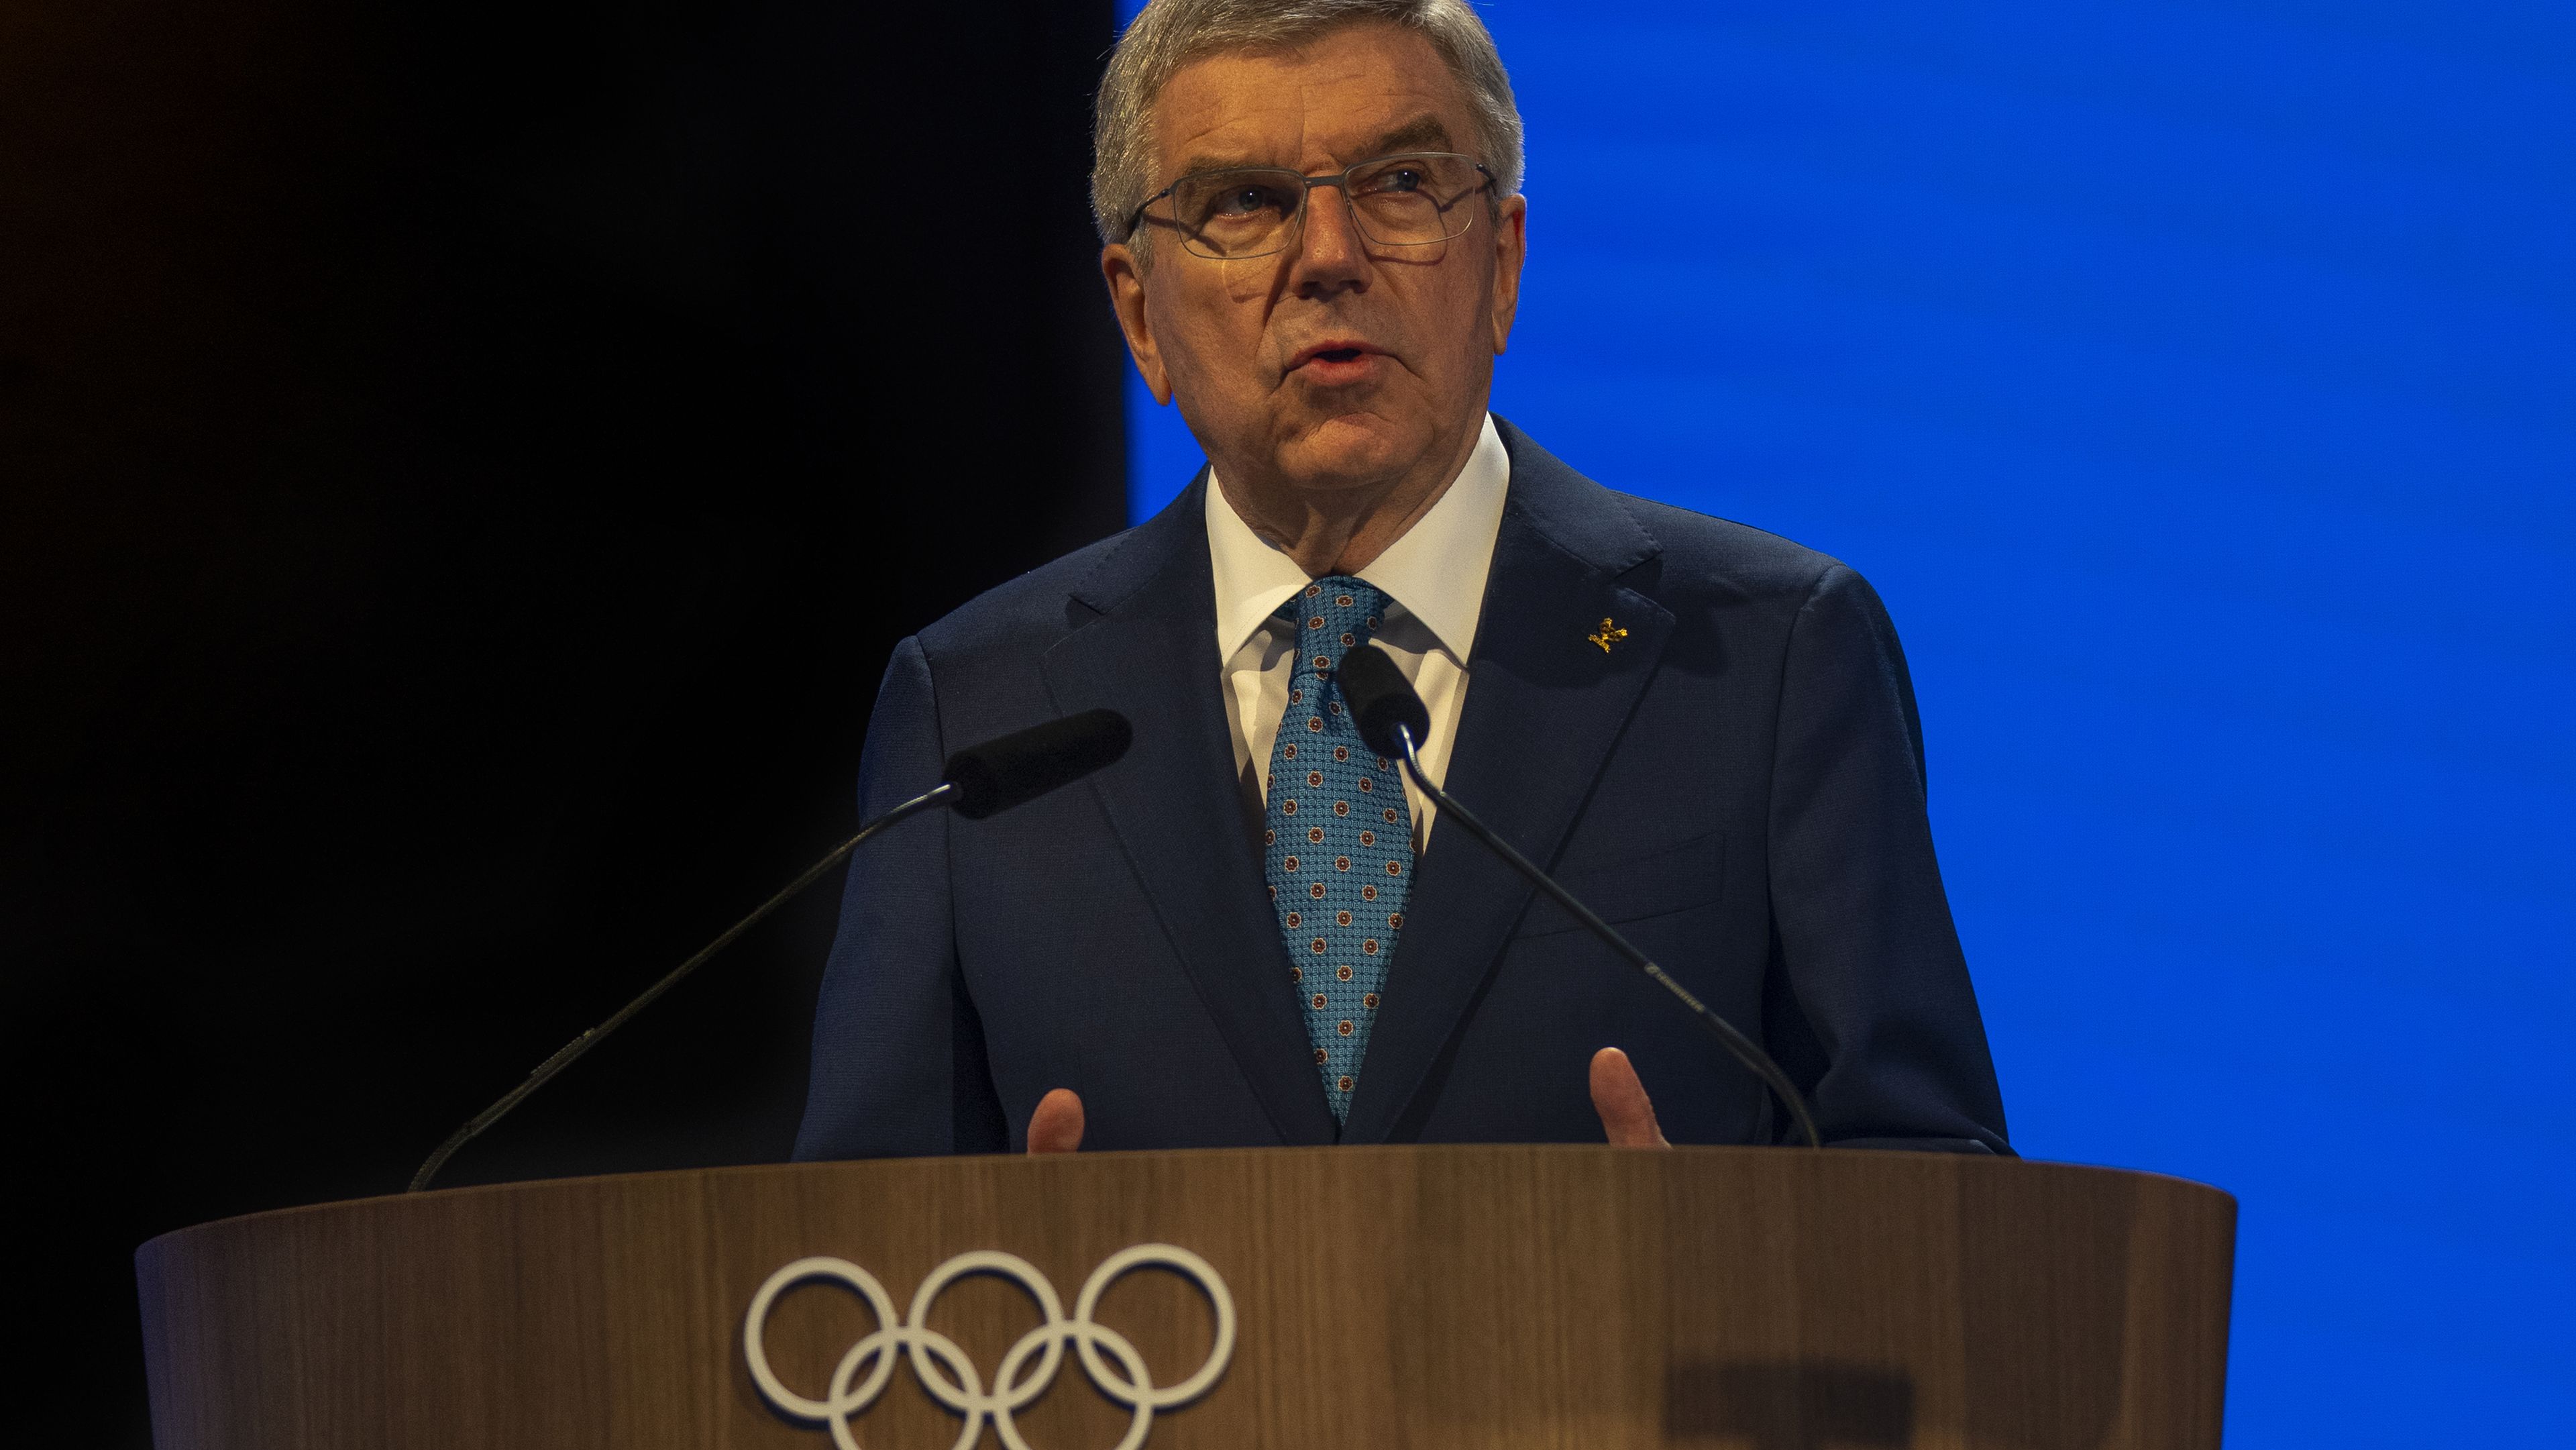 International Olympic Committee president Thomas Bach speaks at the 141st IOC session.